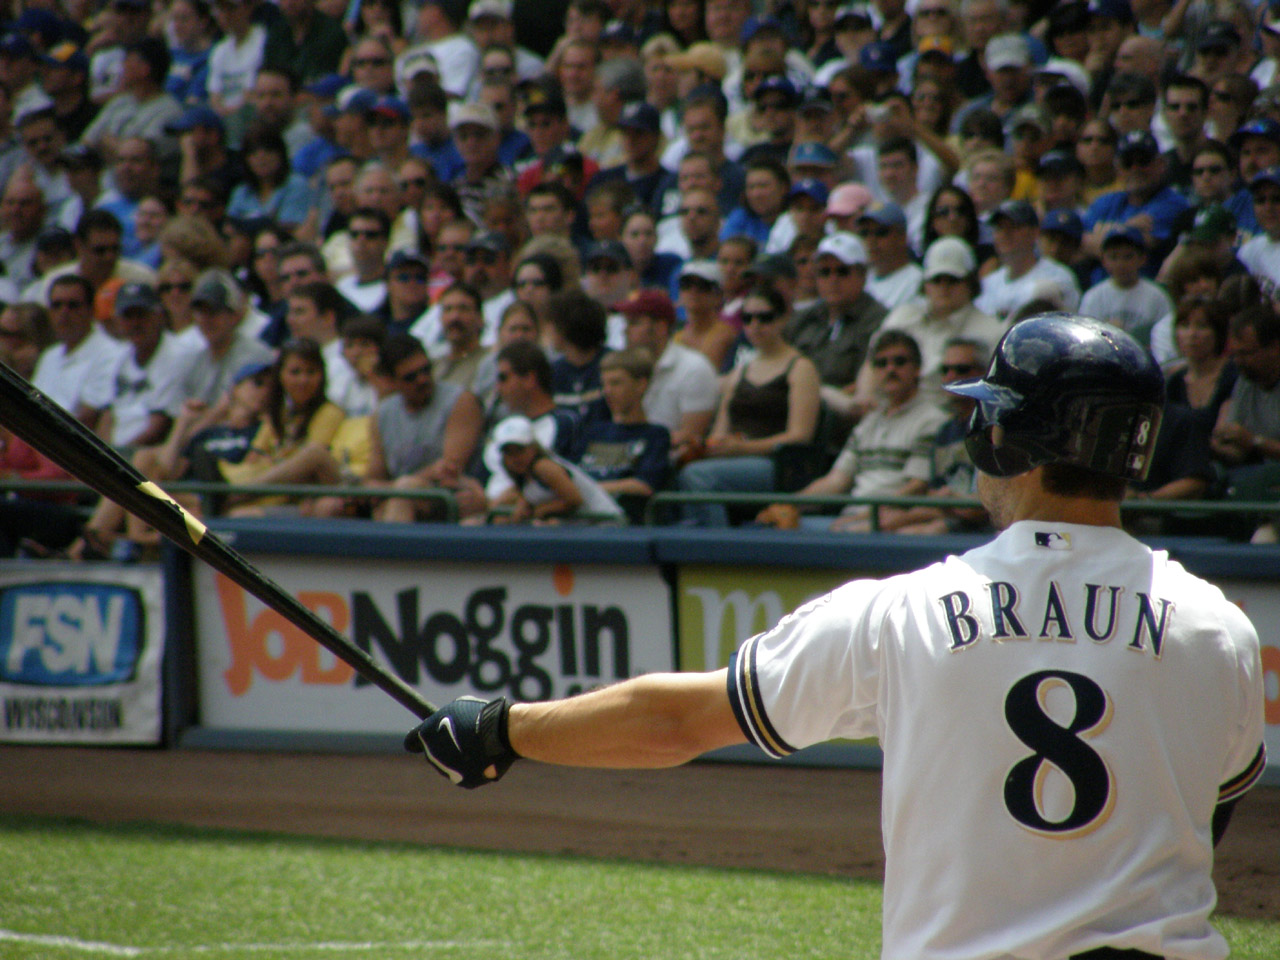 Ryan Braun had short stint in minor leagues before a 14-year career